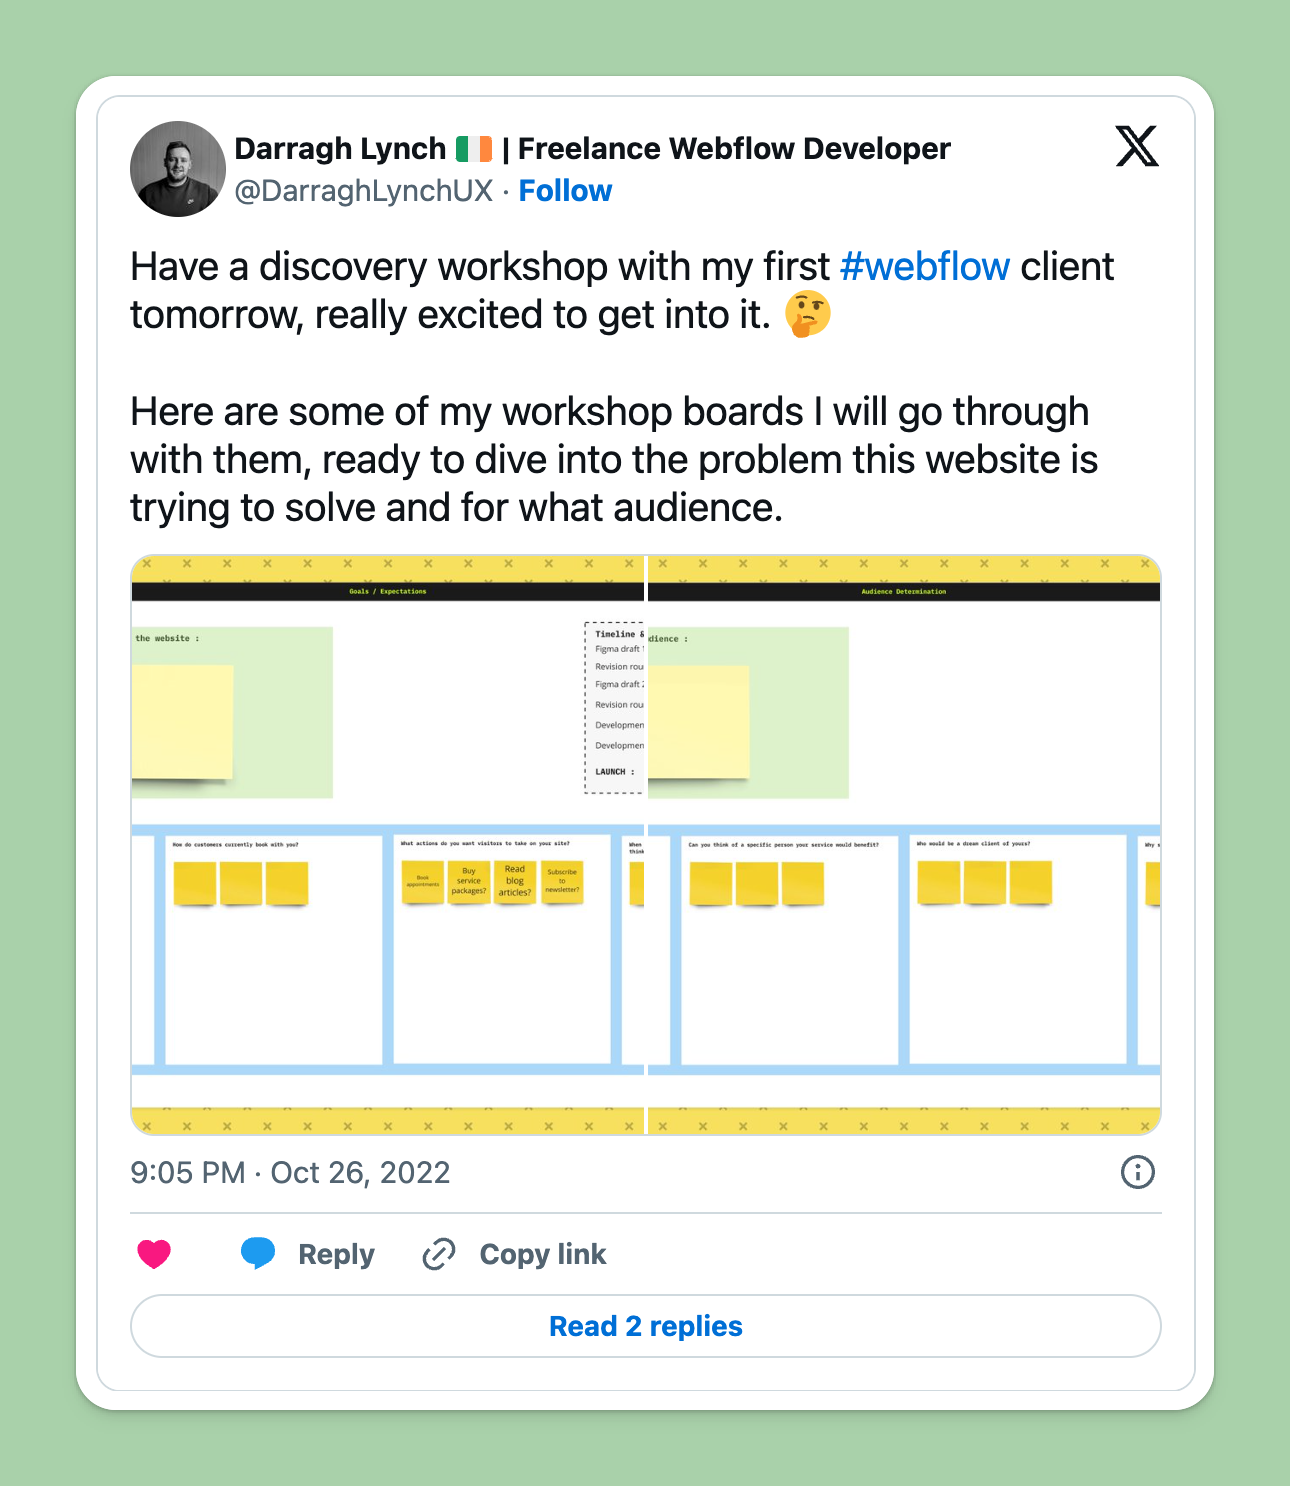 Tweet by Darragh Lynch on his workshop board for running intro client call.